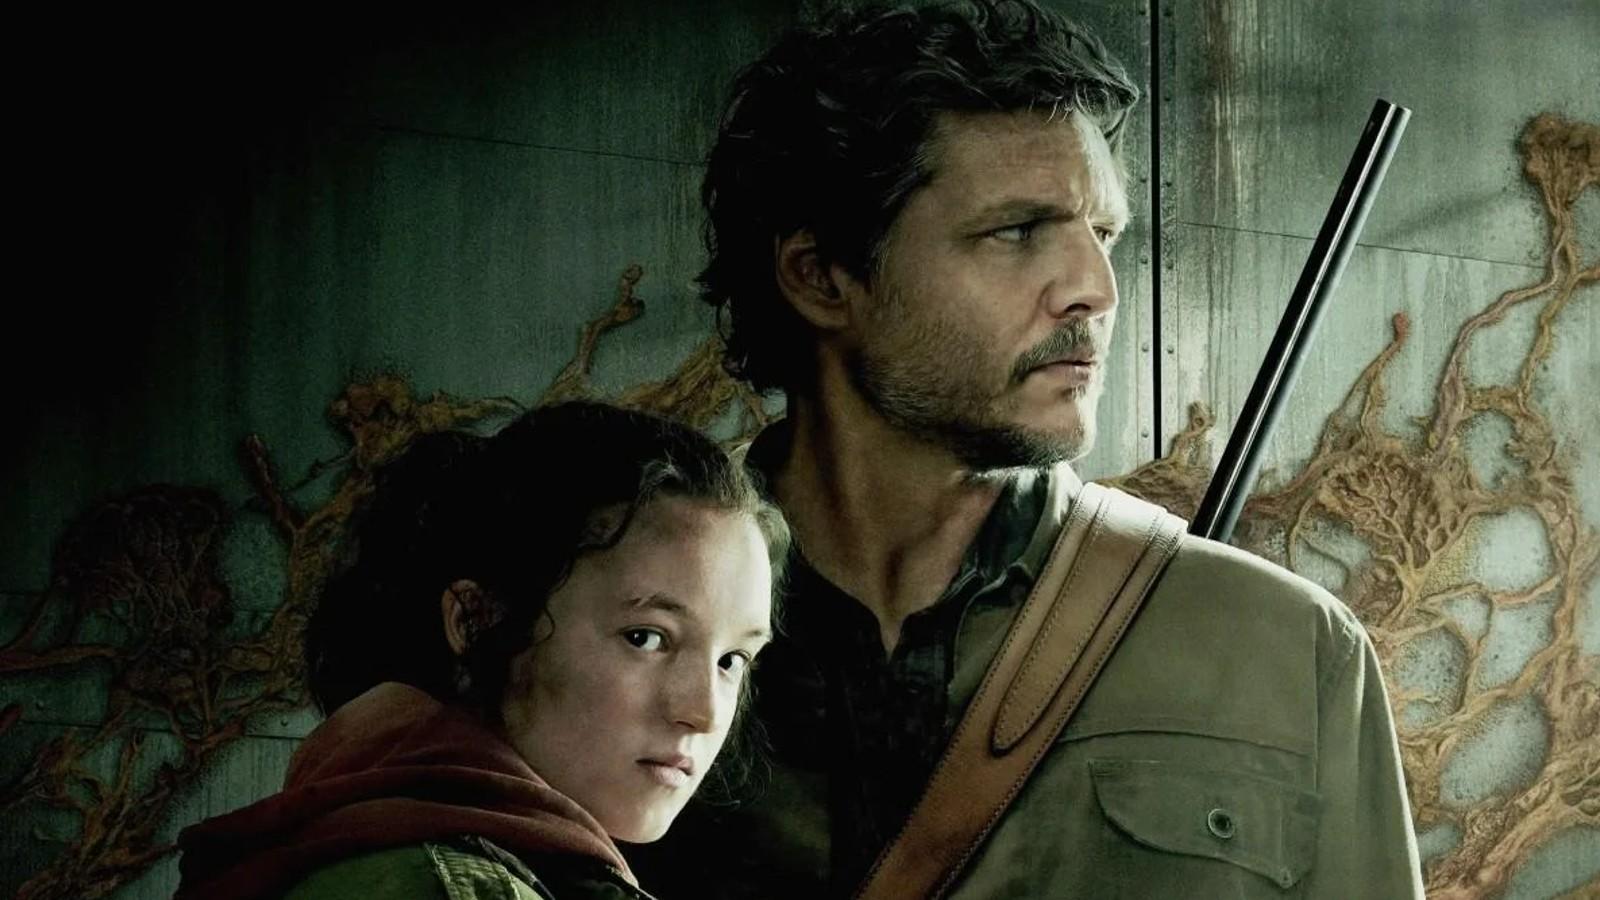 Pedro Pascal and Bella Ramsey in The Last of Us HBO series